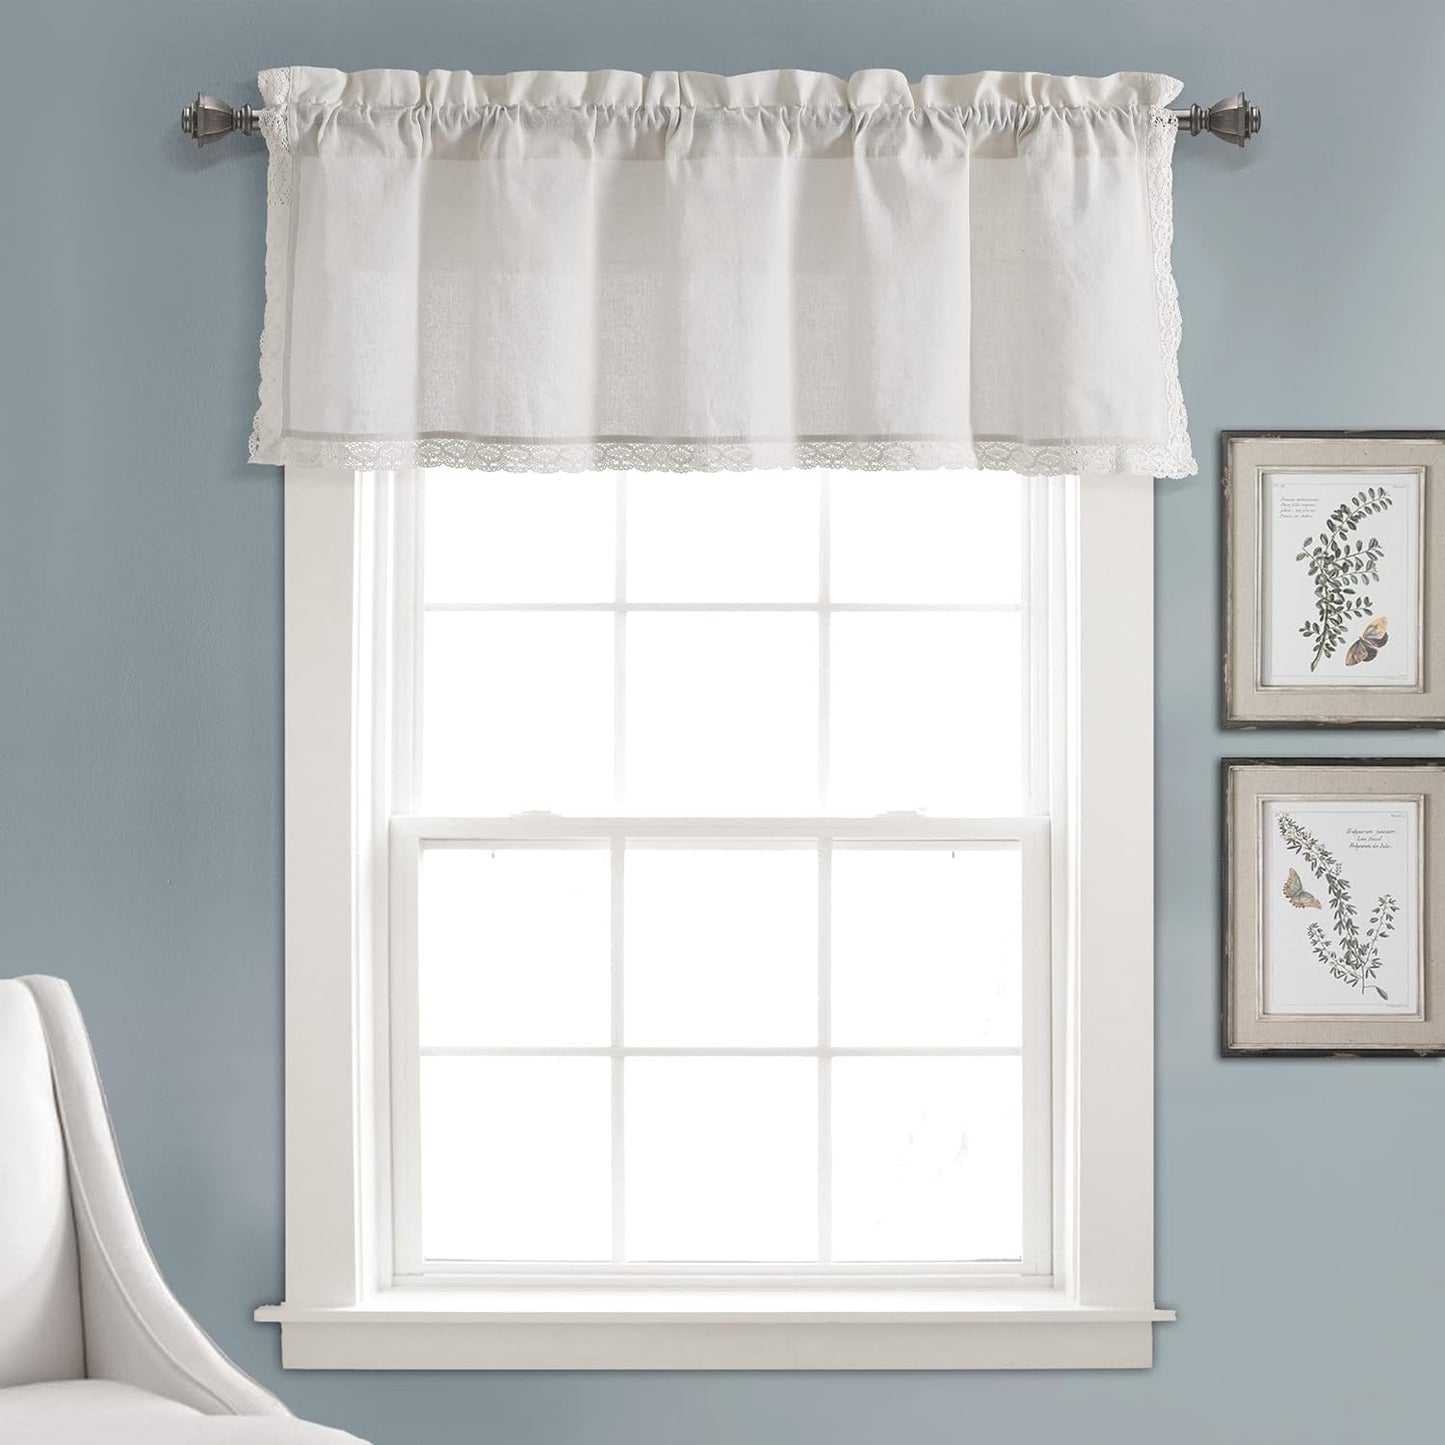 Lush Decor Rosalie Light Filtering Window Curtain Panel Set- Pair- Vintage Farmhouse & French Country Style Curtains - Timeless Dreamy Drape - Romantic Lace Trim - 54" W X 84" L, White  Triangle Home Fashions White Valance Valanace